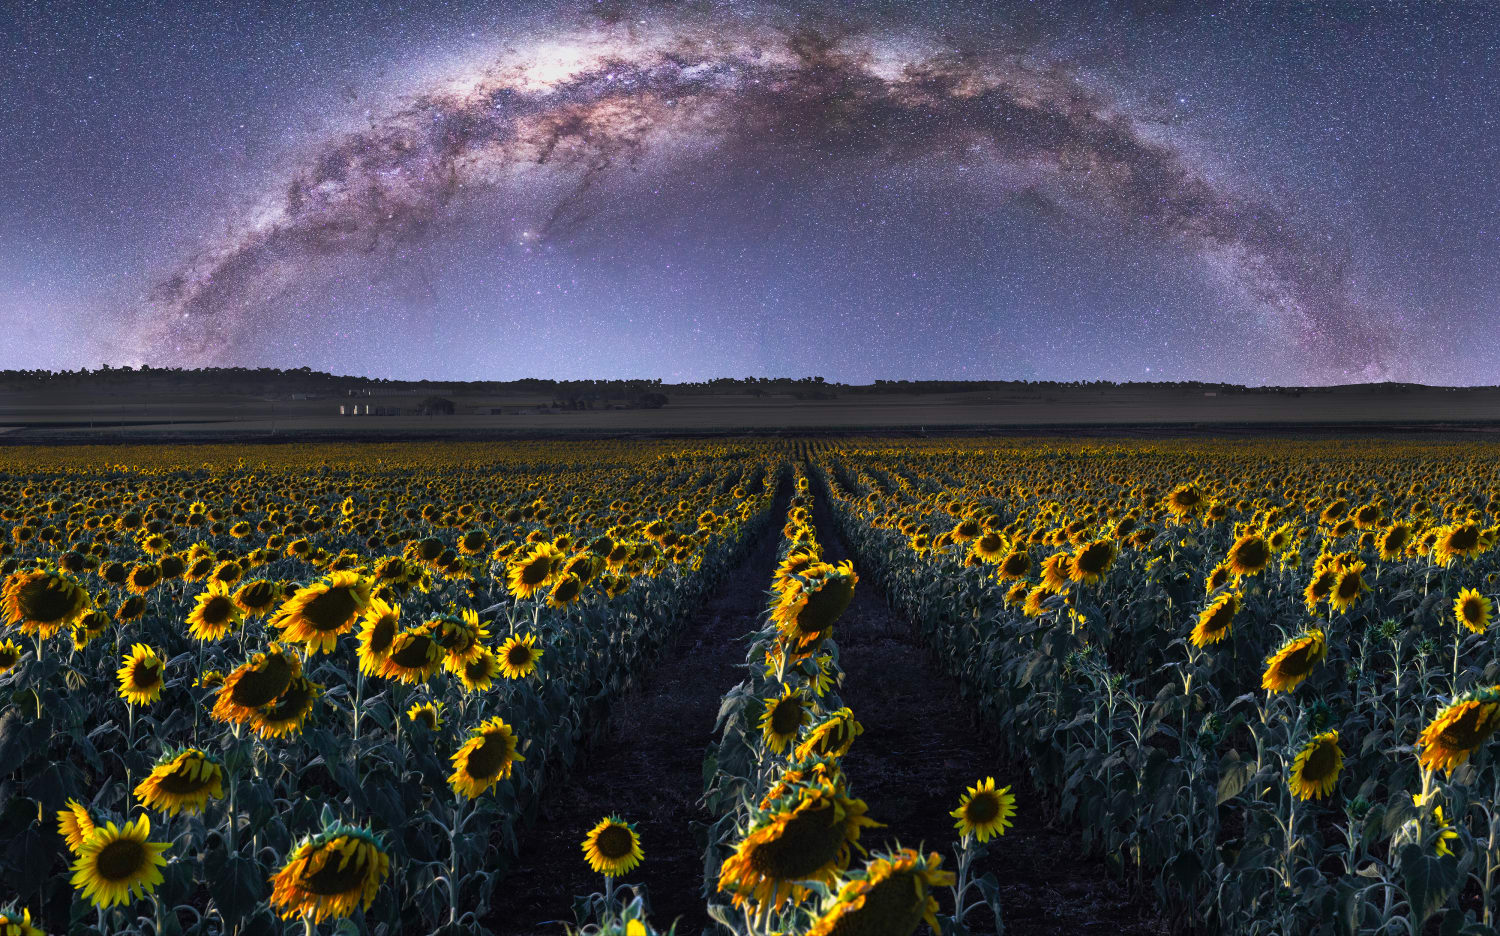 Sunflowers and Stars in SE QLD, Australia